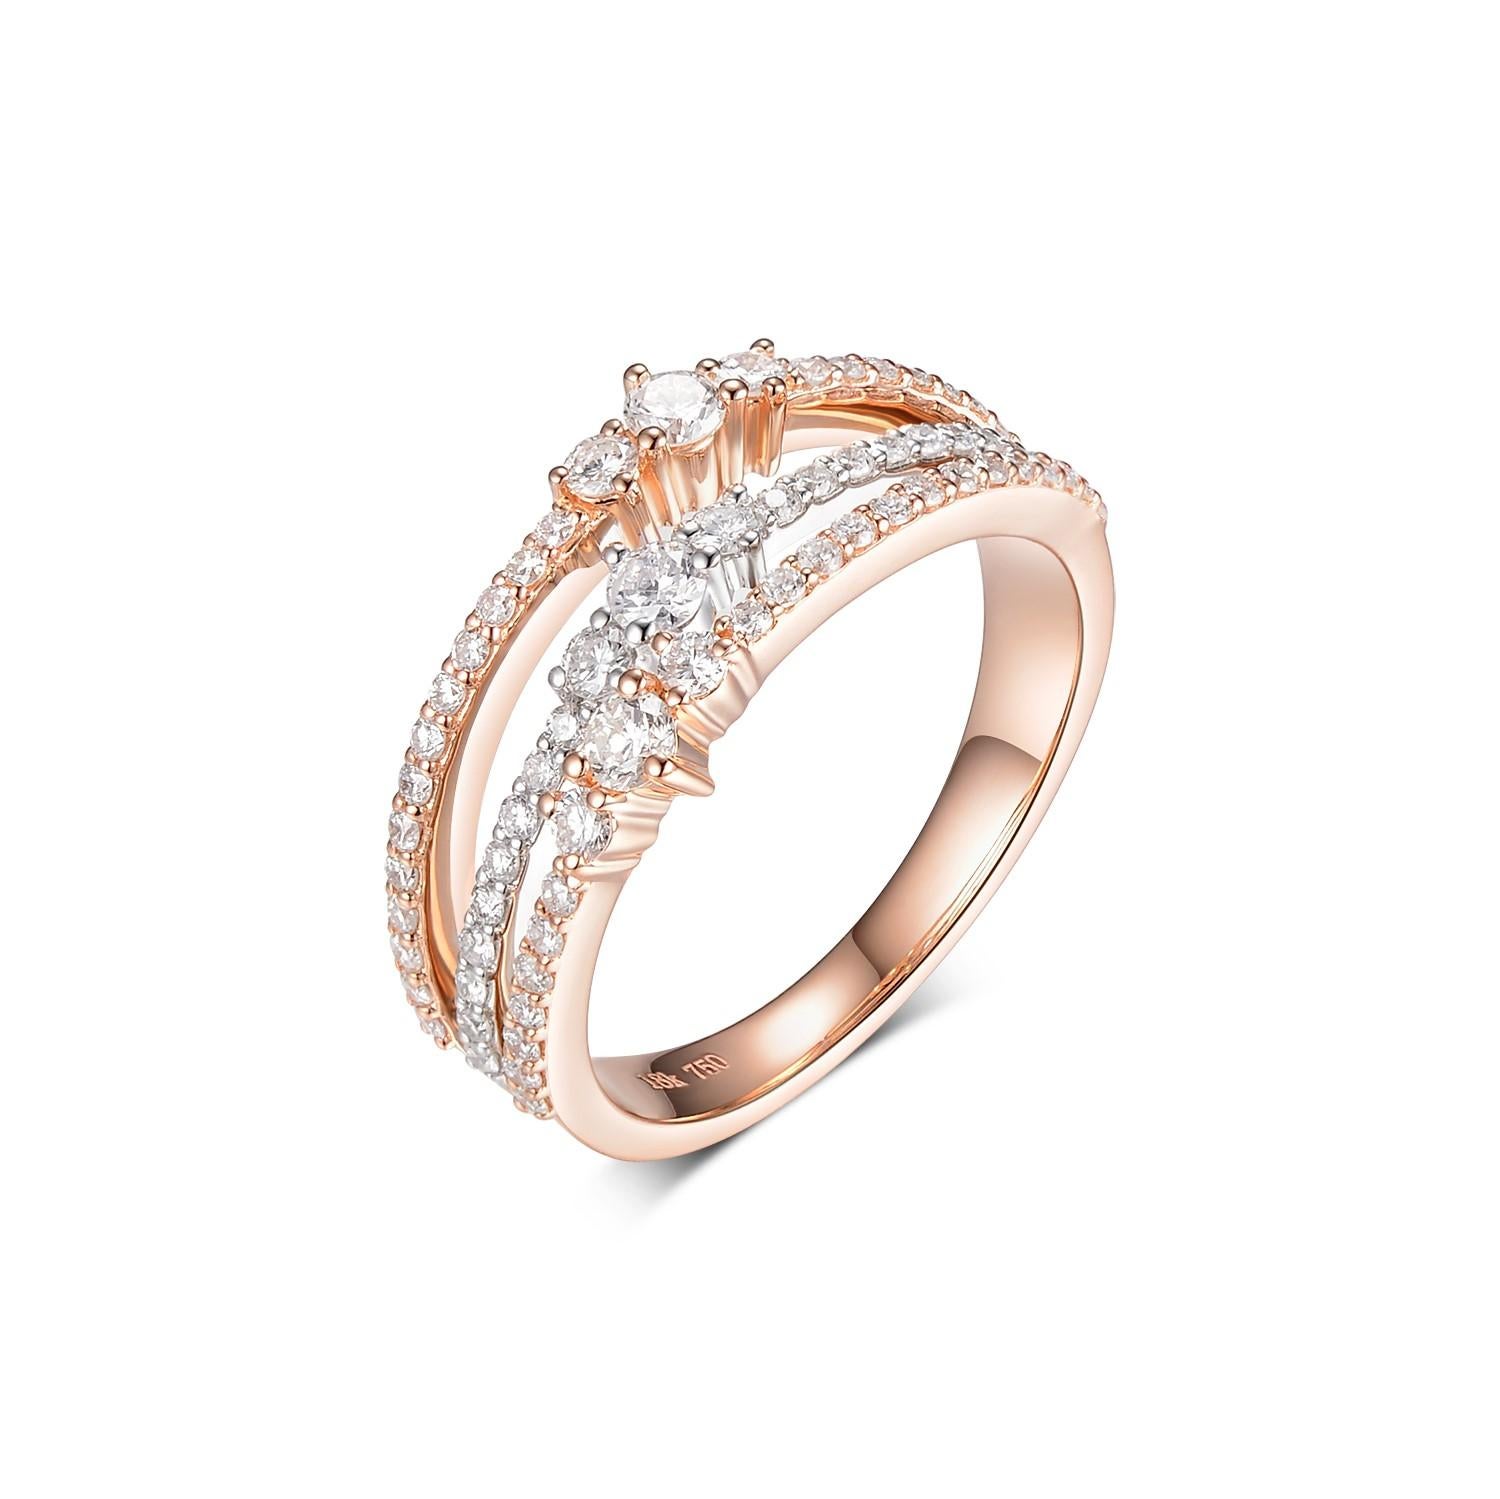 This dainty ring features 0.66 carat of round diamond. Great for everyday use. It's also stack-able with other band rings. Diamonds are set in 18 karat rose and white gold.

US 6.5 
Round Diamond 0.66 carat